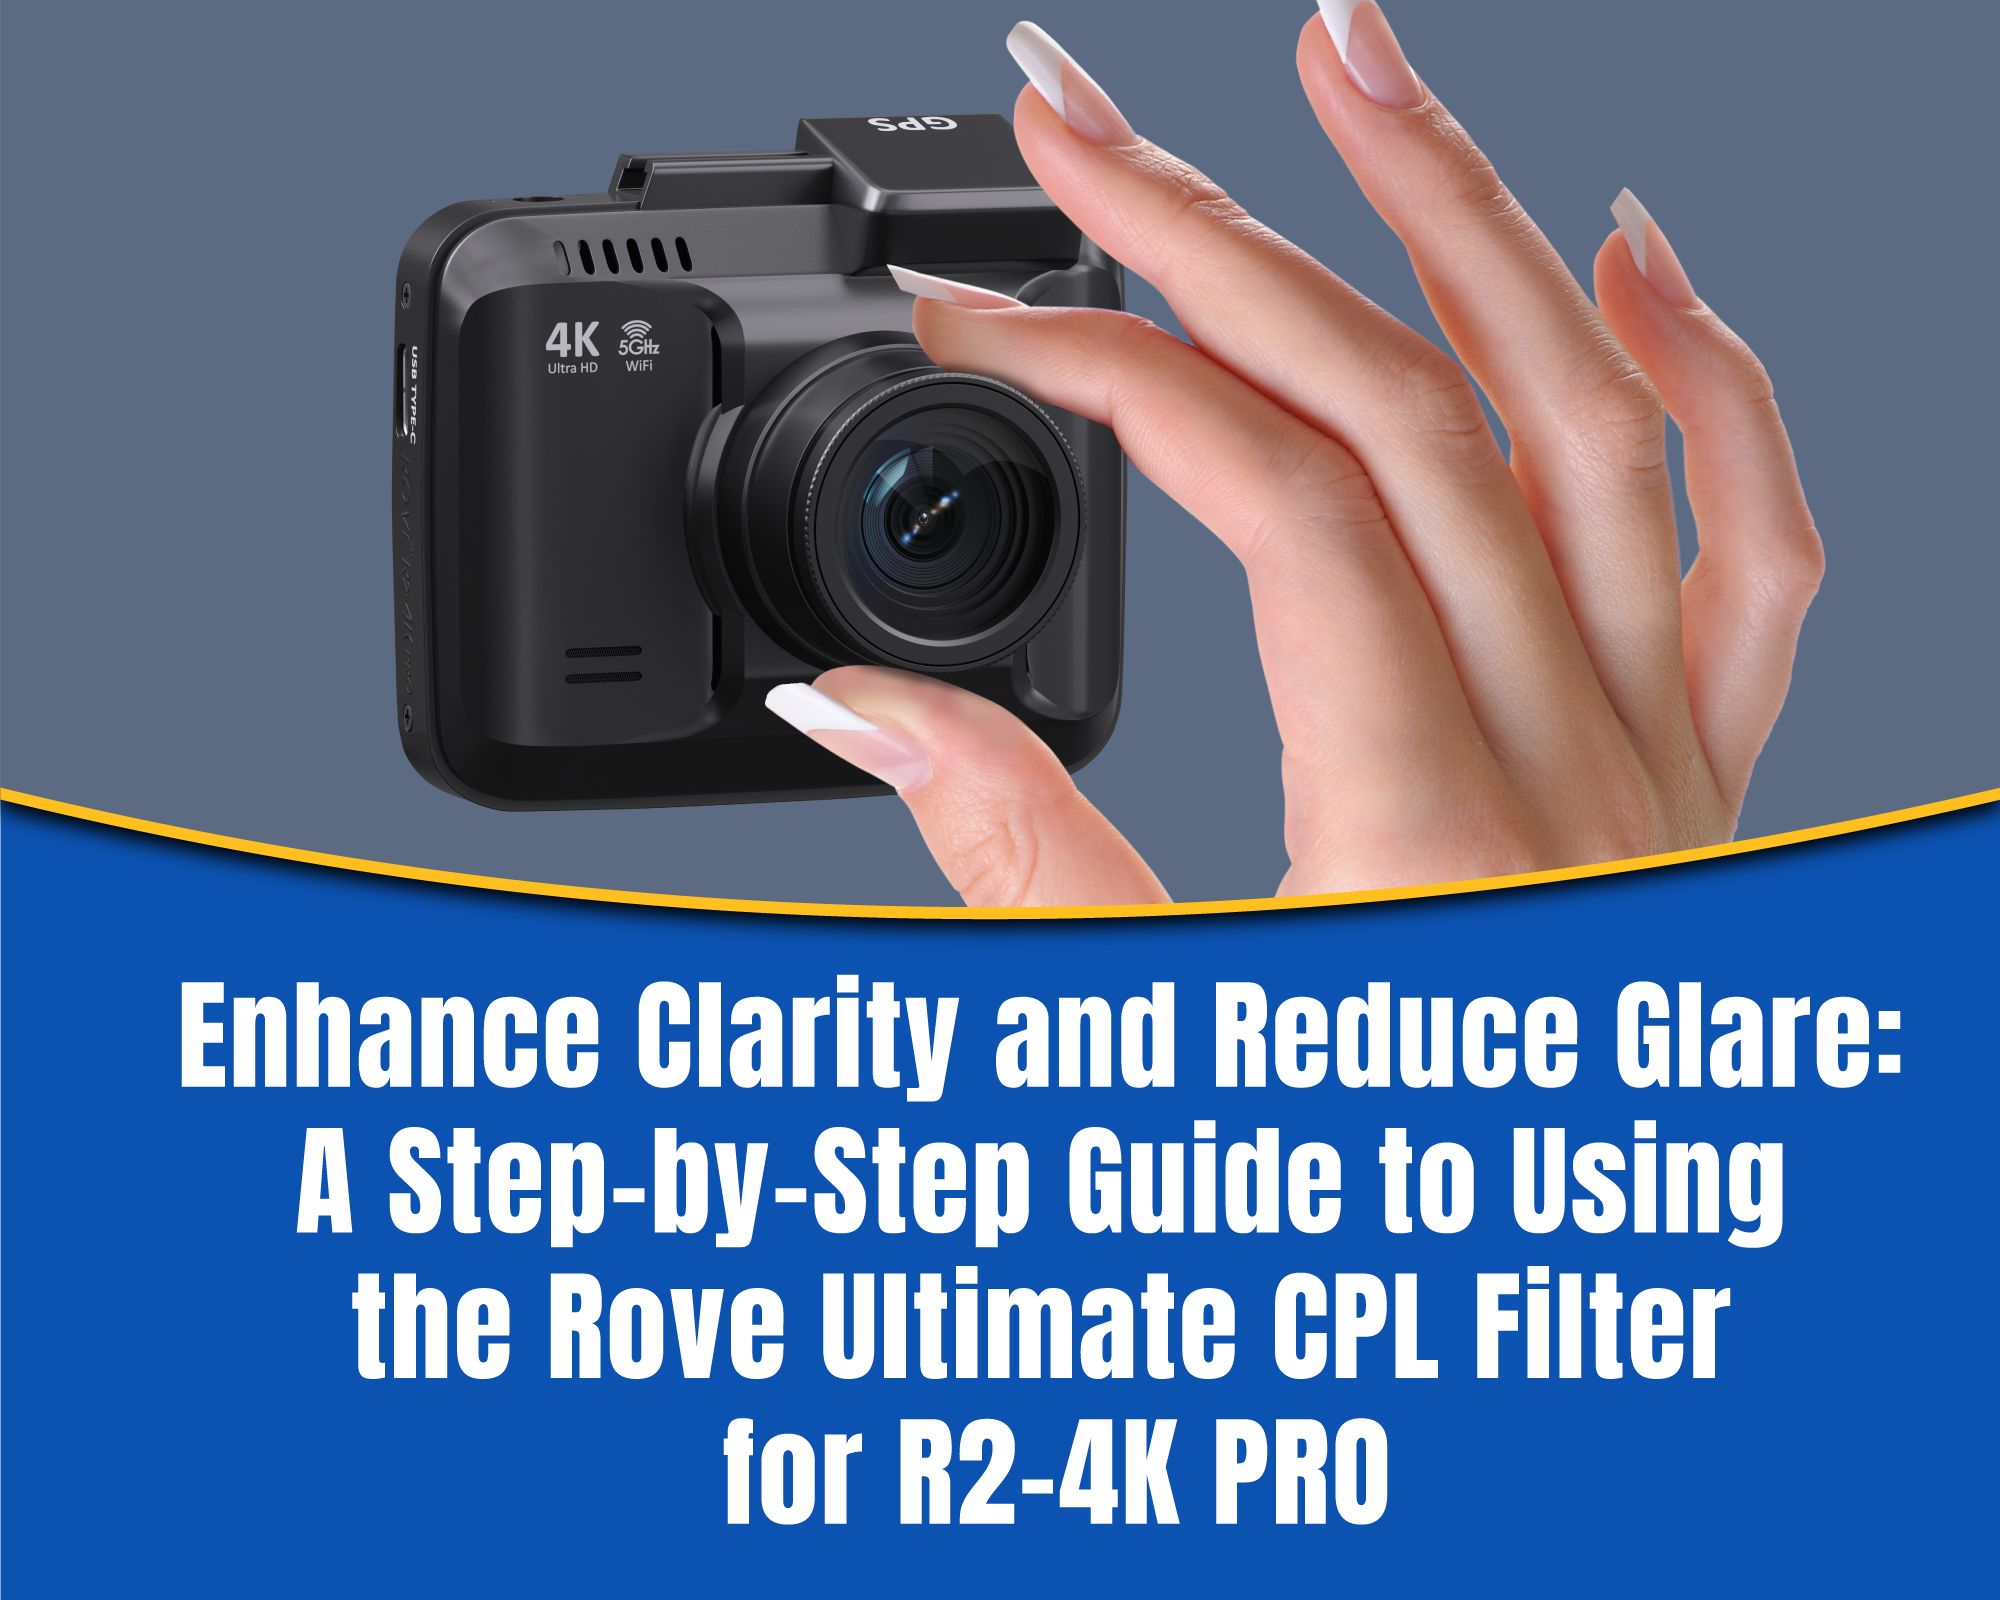 Enhance Clarity and Reduce Glare: A Step-by-Step Guide to Using the Rove Ultimate CPL Filter for R2-4K PRO